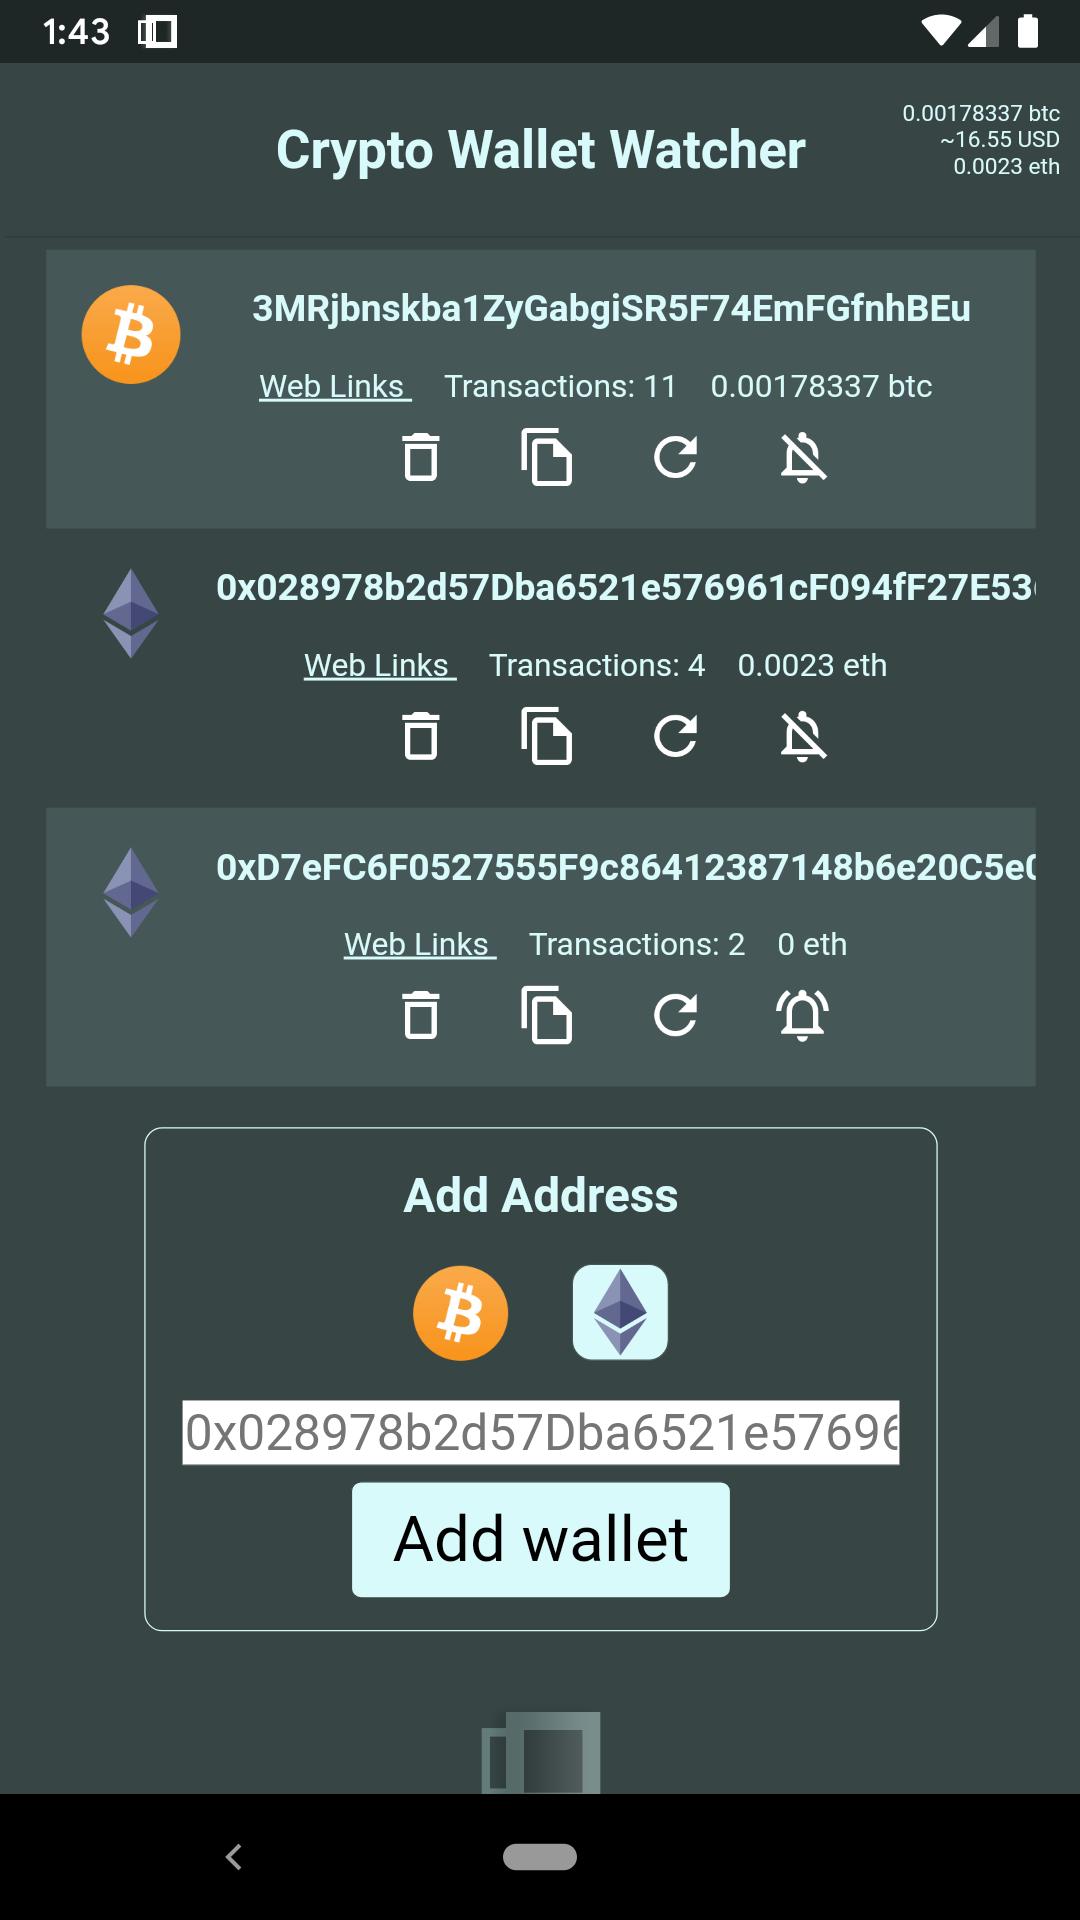 Crypto Wallet Watcher for Android - APK Download